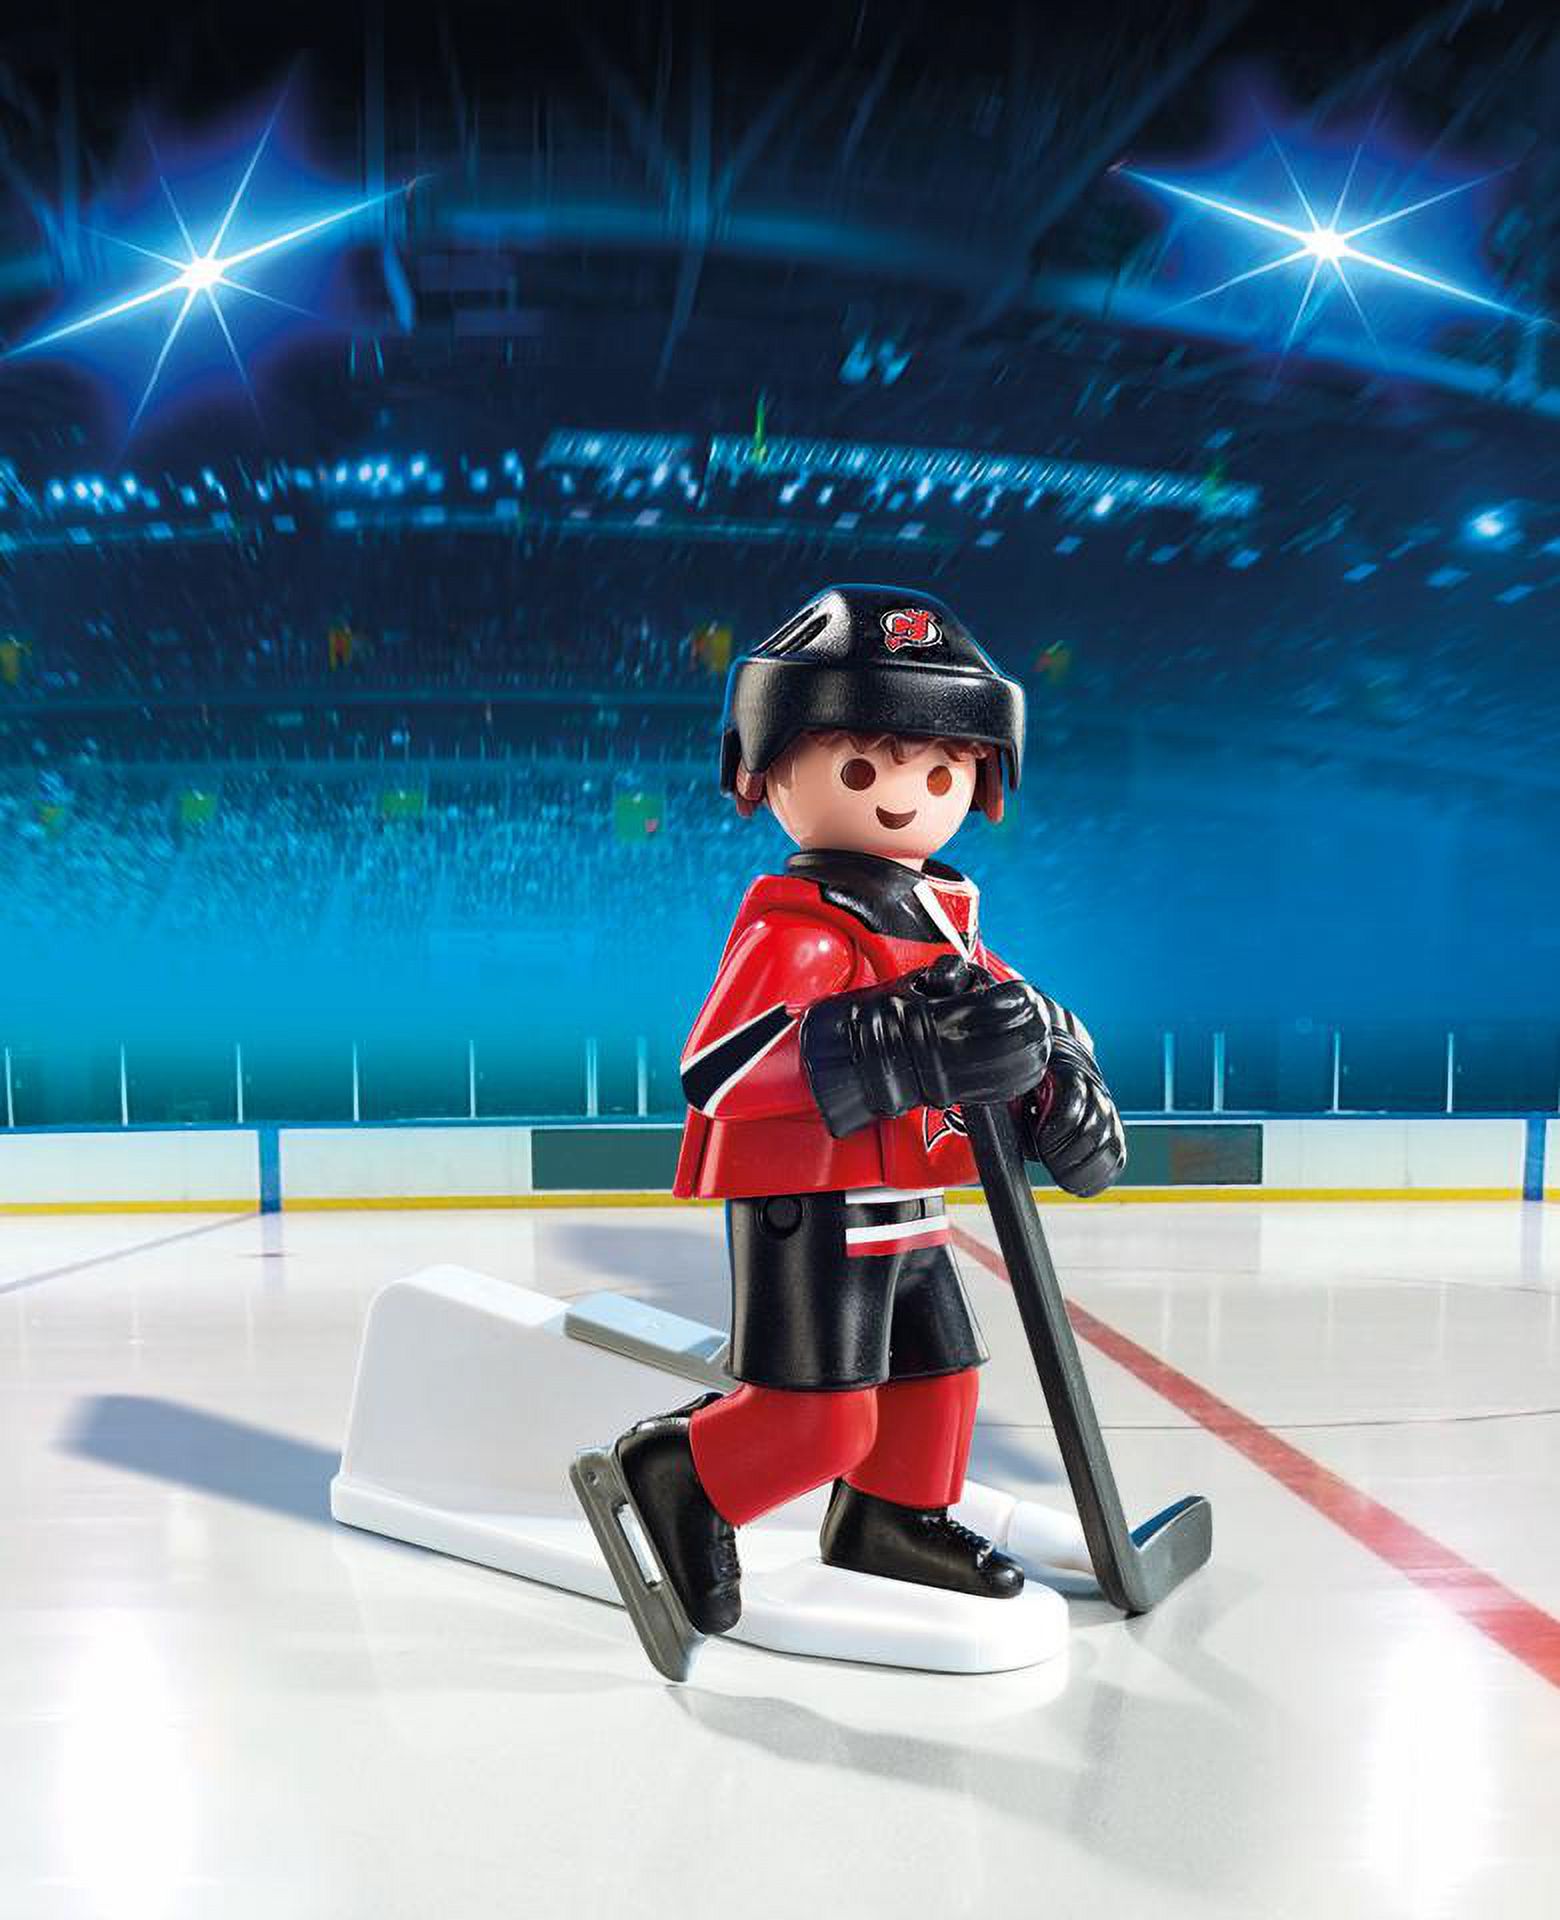 PLAYMOBIL NHL New Jersey Devils Player Figure - image 2 of 4